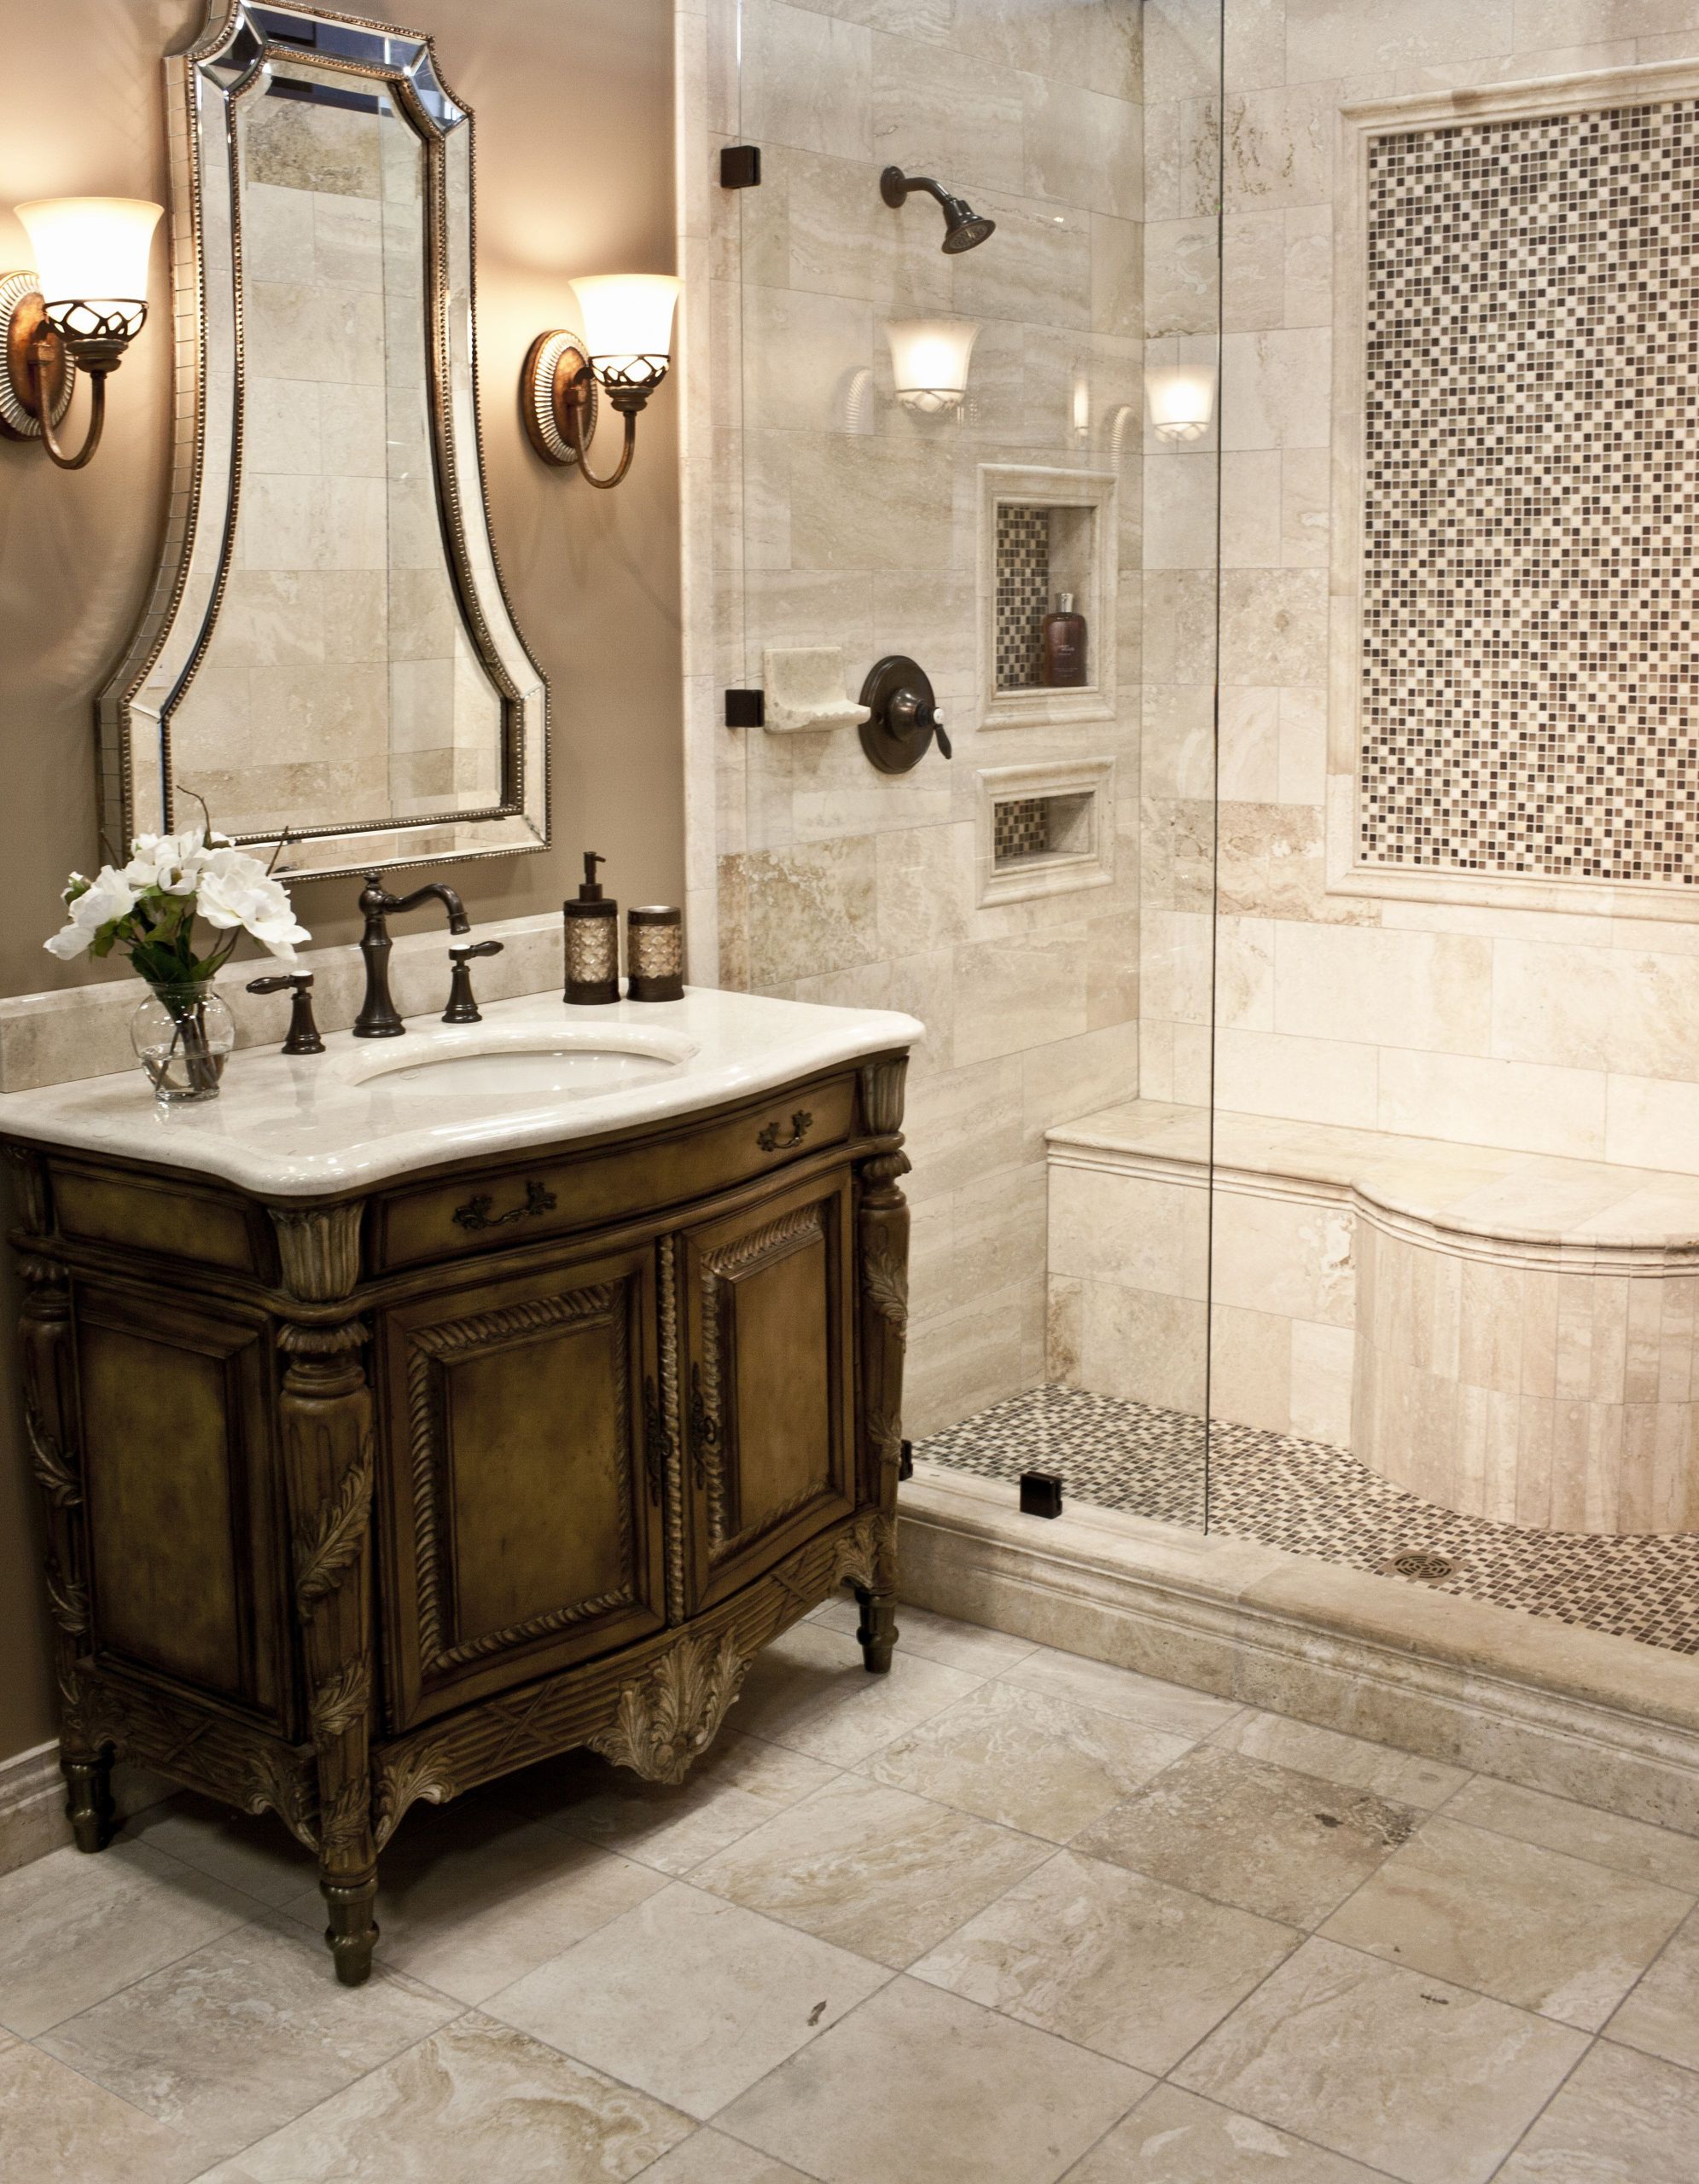 Bathroom Tile Ideas Traditional
 Traditional Bathroom Design at its Best